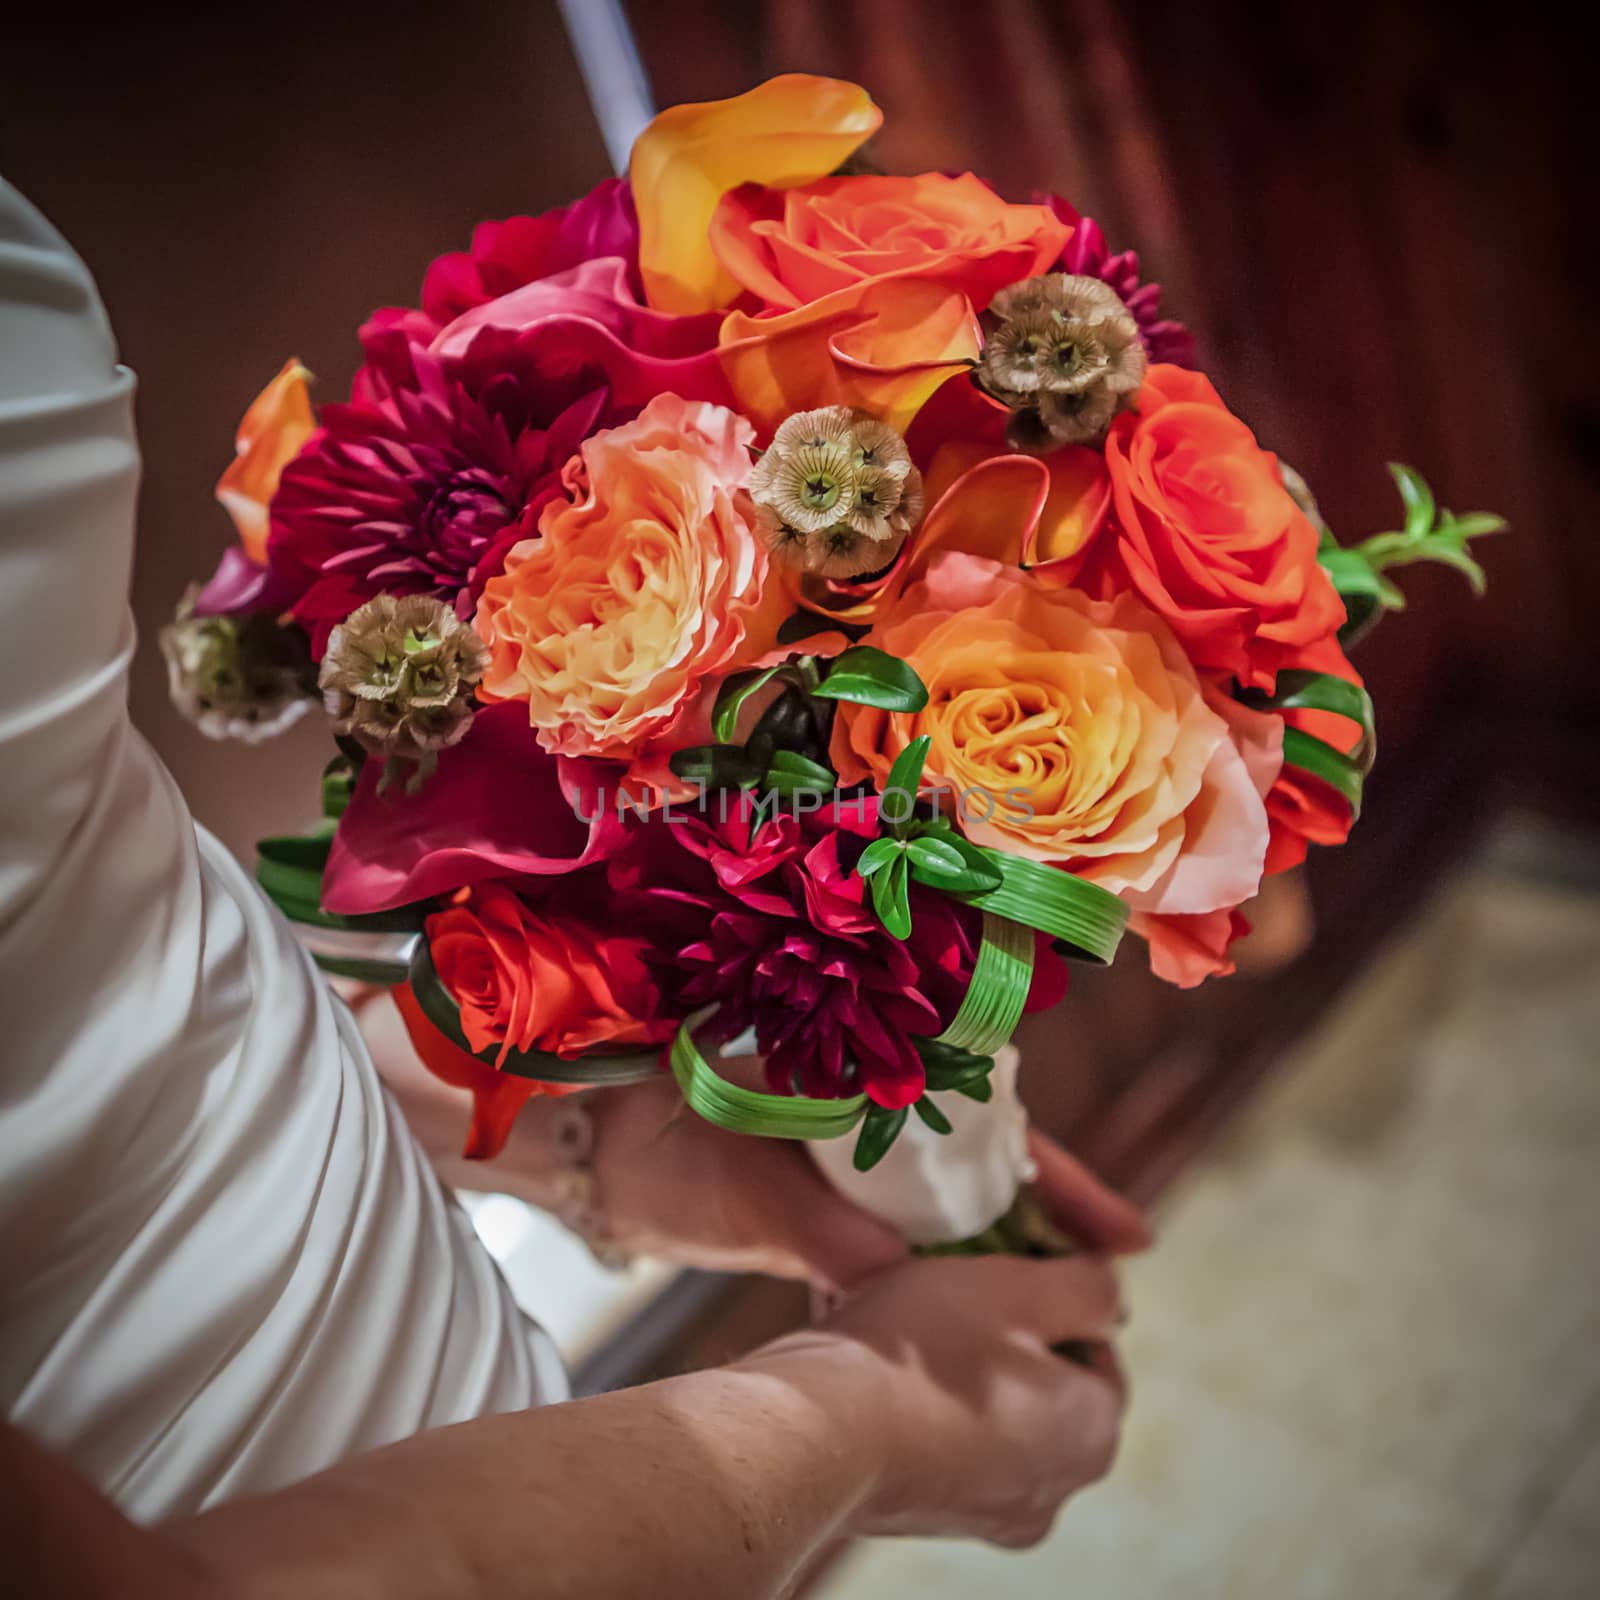 Colorful Bouquet Held by Bride by salejandro